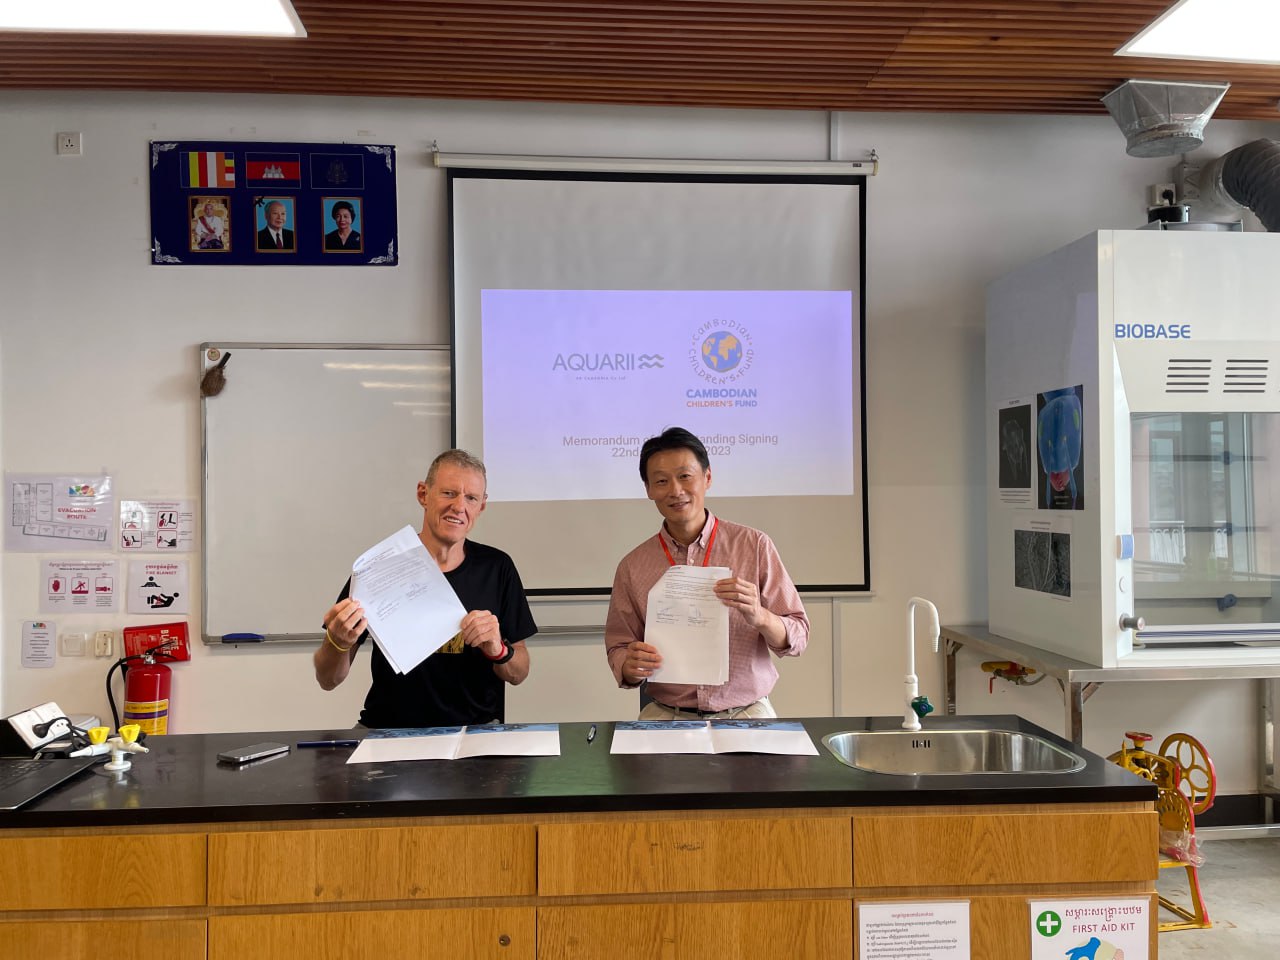 Aquarii and Cambodian Children’s Fund Join Forces to Transform Lives in Special Partnership